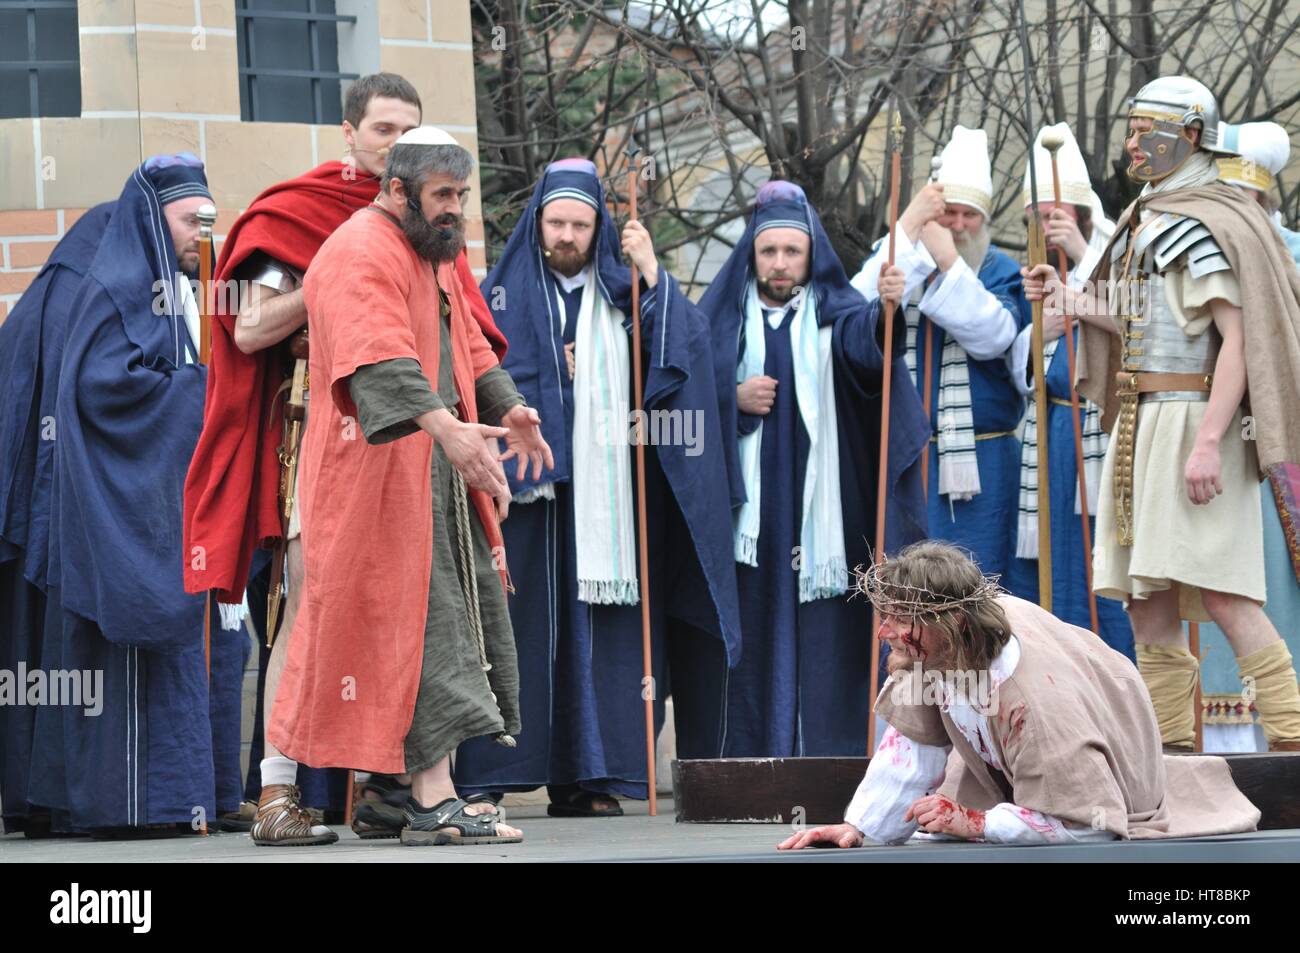 Jesus falls on the way to his crucifixion, during the street performances Mystery of the Passion. Stock Photo